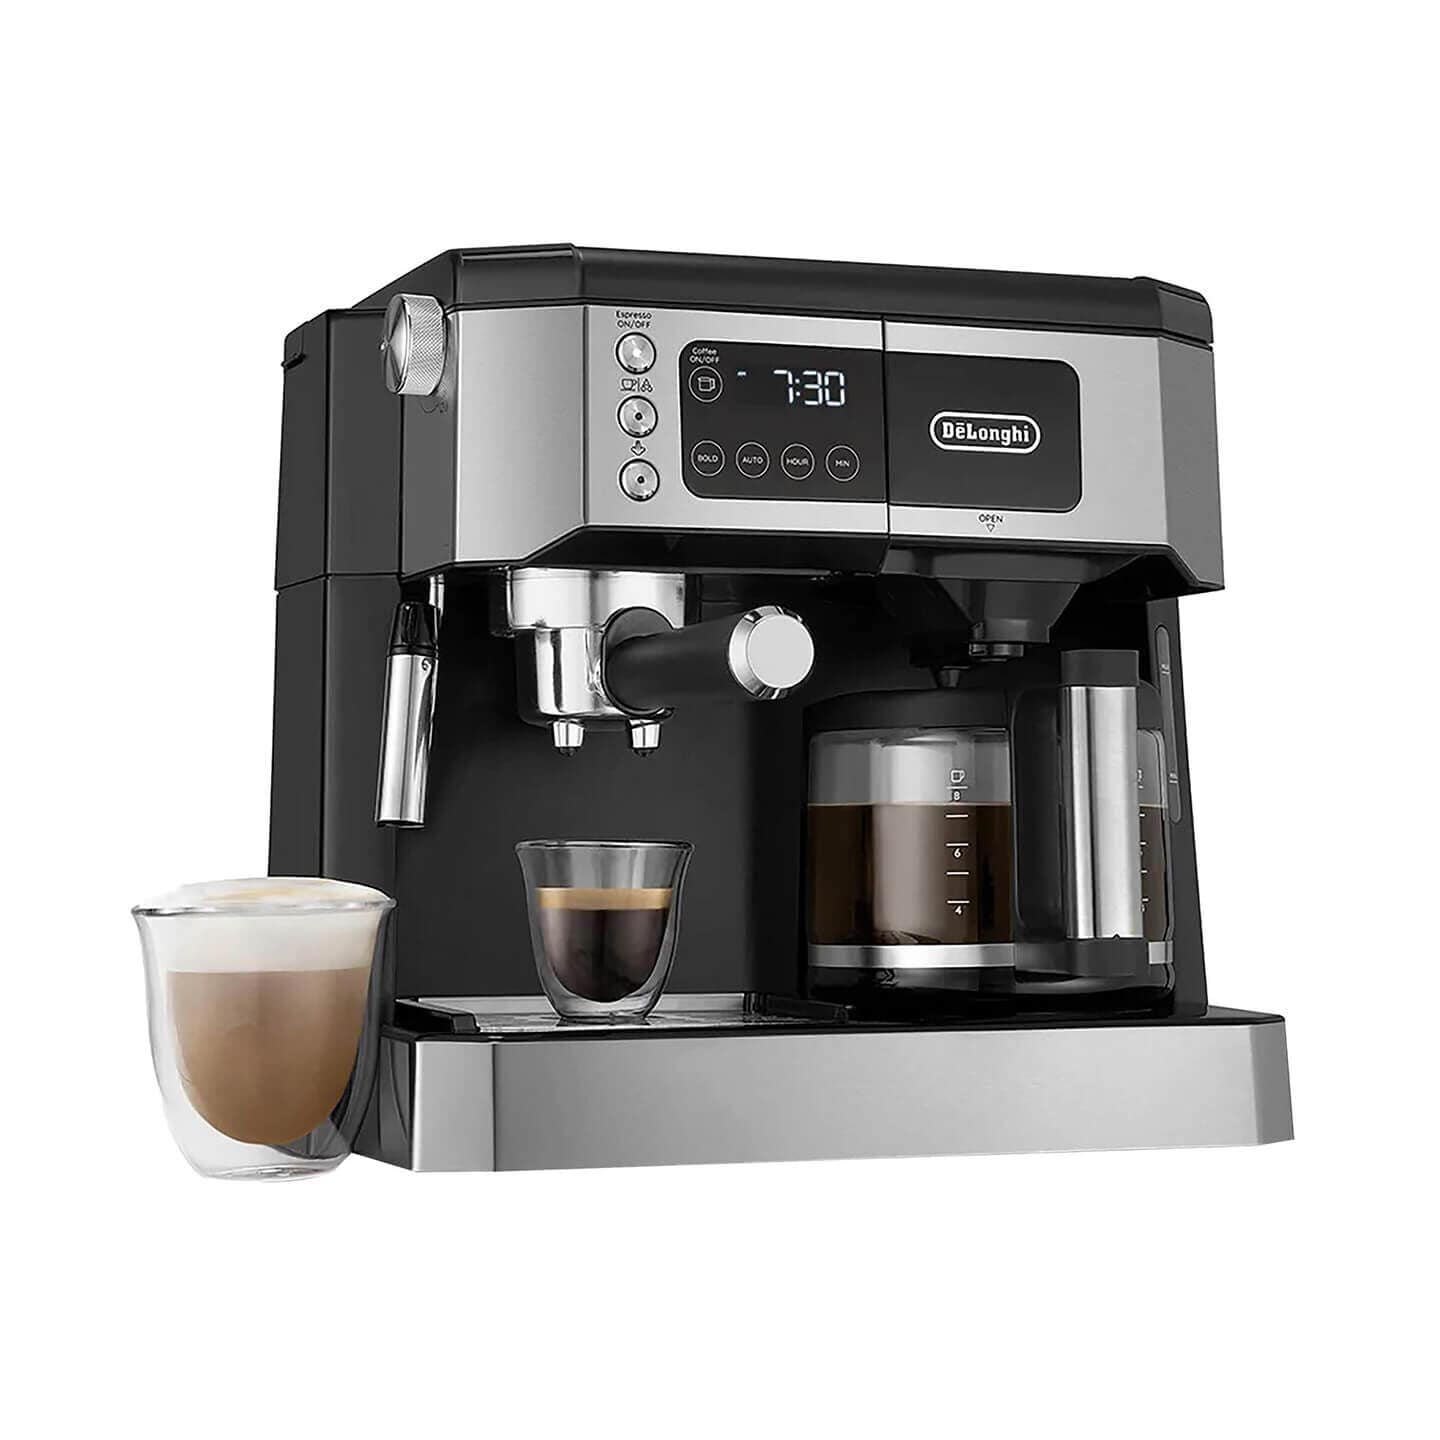 De'Longhi All-In-One Cappuccino, Espresso with Coffee Maker in Black and Stainless Steel